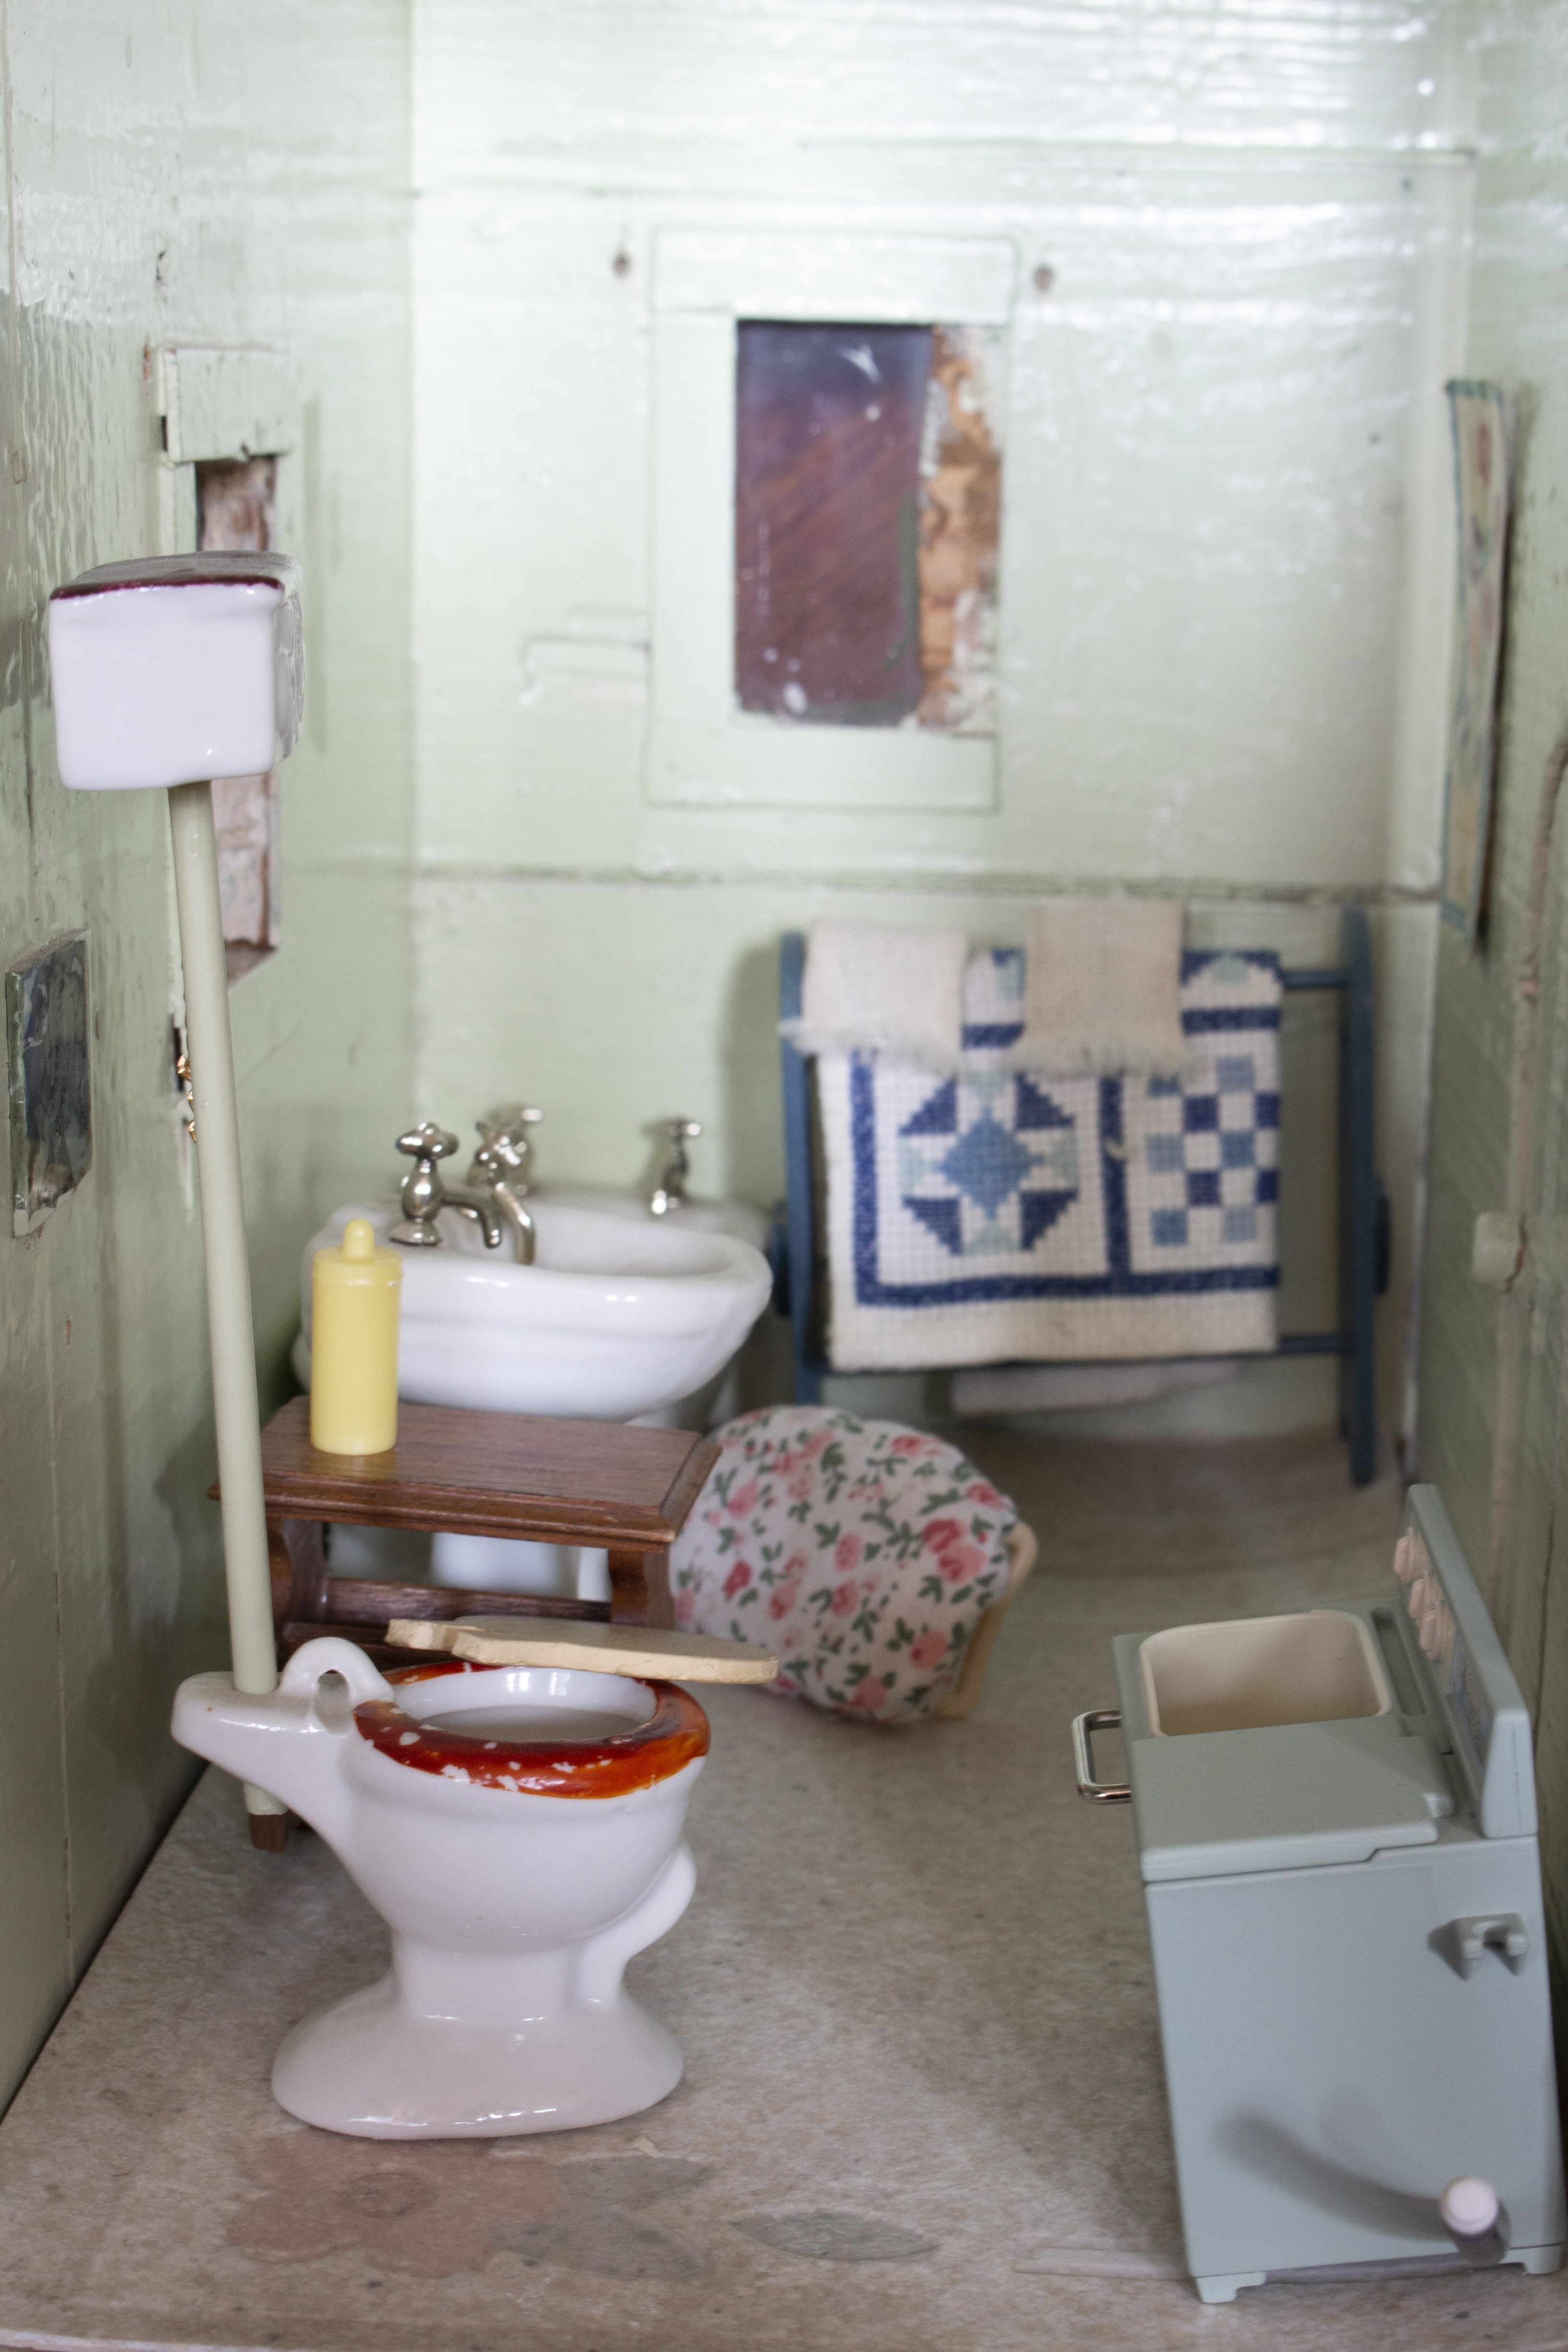 A miniature bathroom with teal-blue walls, a porcelain toilet and sink, and green washing machine.